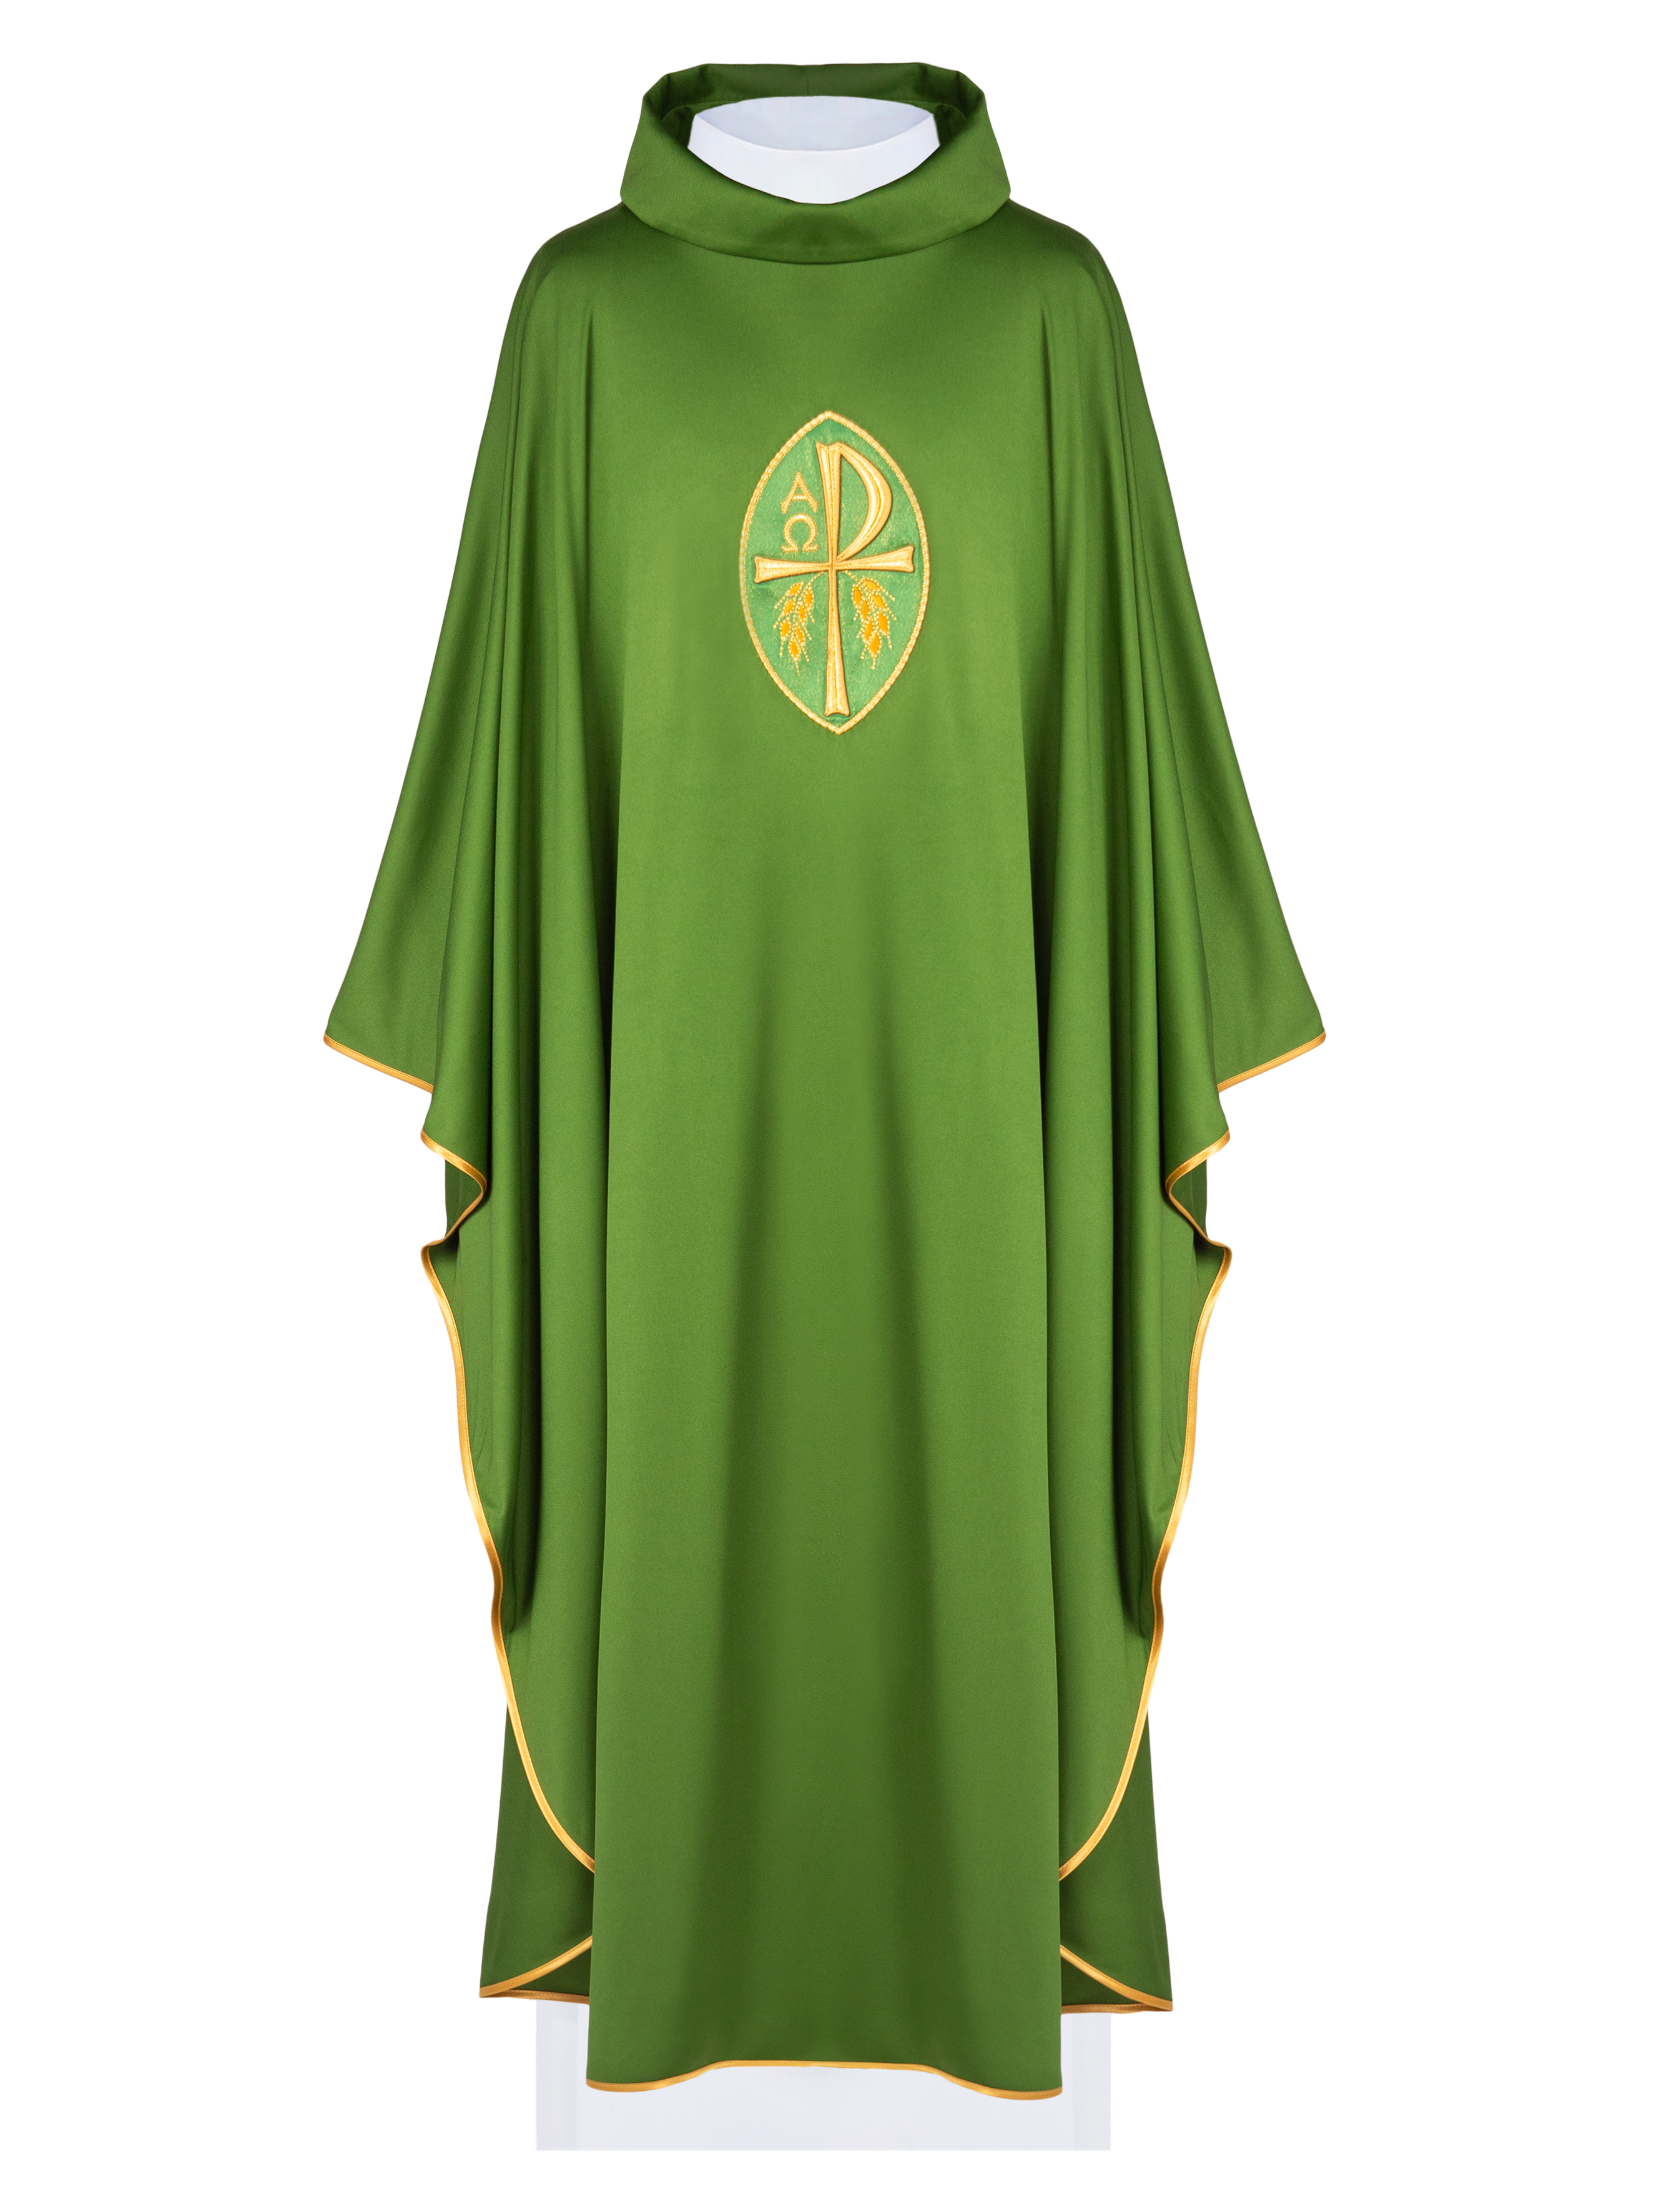 Chasuble embroidered Cross green lightweight knit SACROLITE